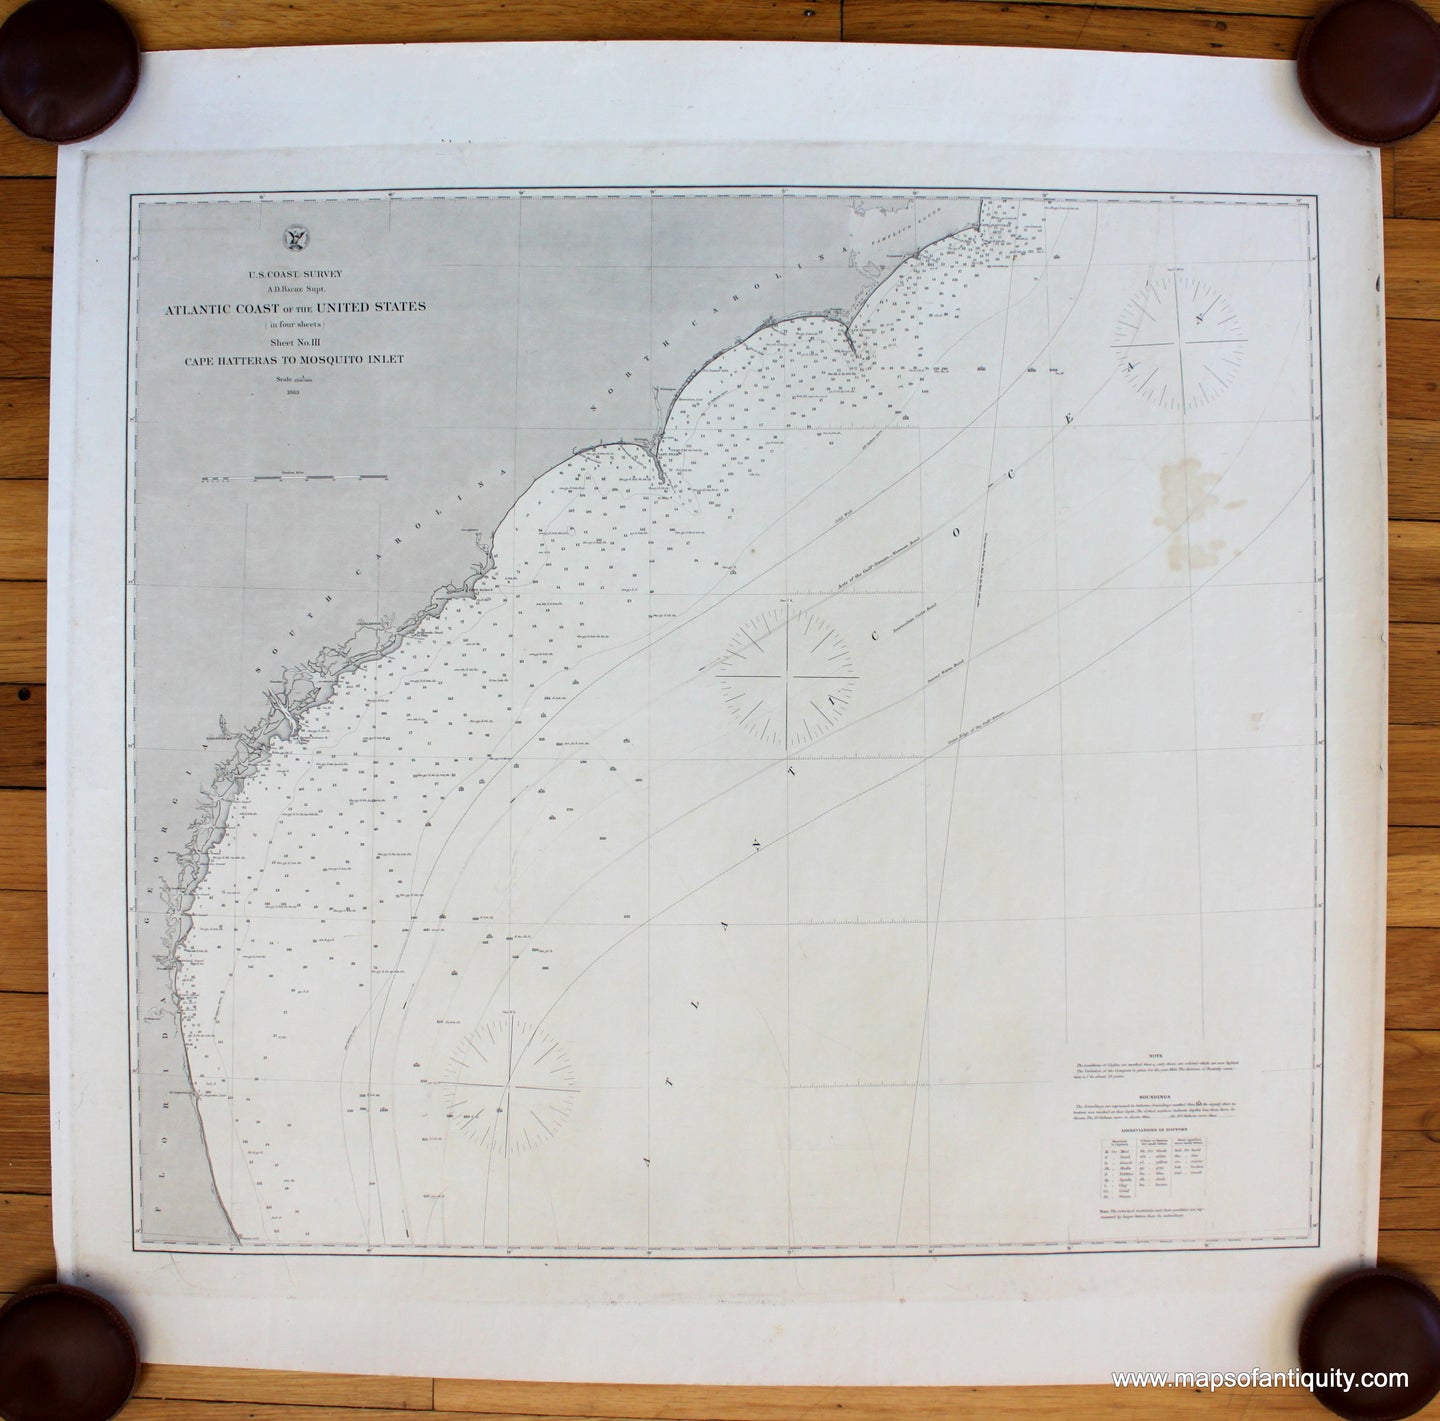 Antique-nautical-chart-restrike-Atlantic-Coast-Southern-United-States-Southeast-Cape-Hatteras-Mosquito-Inlet-NC-SC-GA-FL-USCS-20th-Century-Maps-of-Antiquity